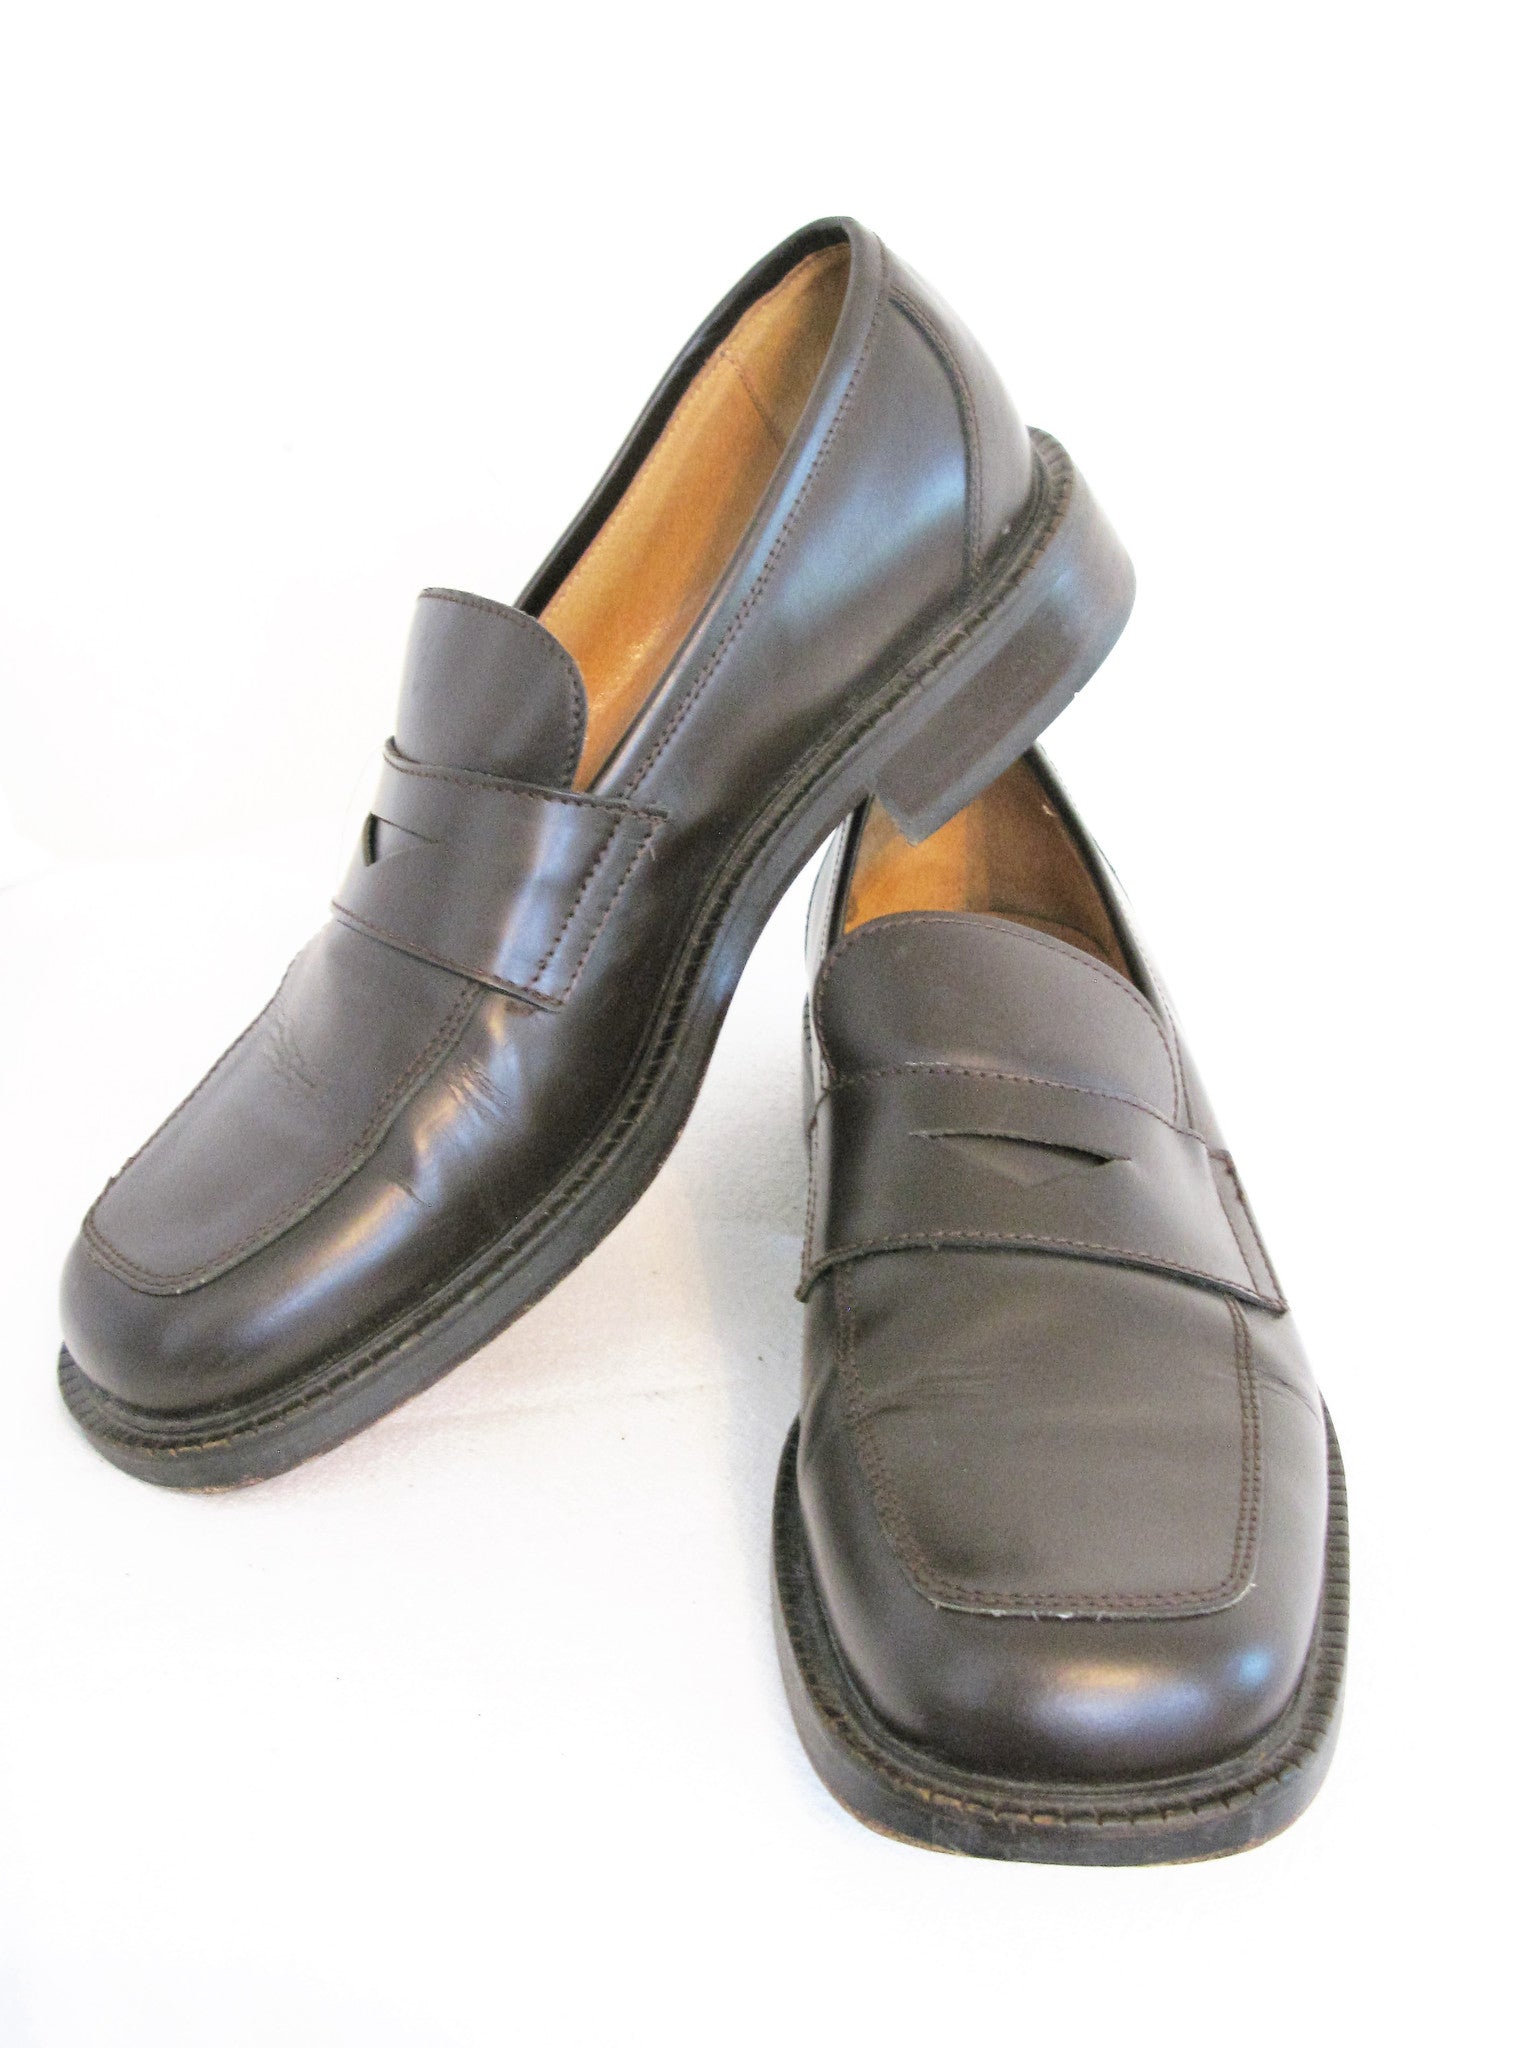 kenneth cole square toe shoes